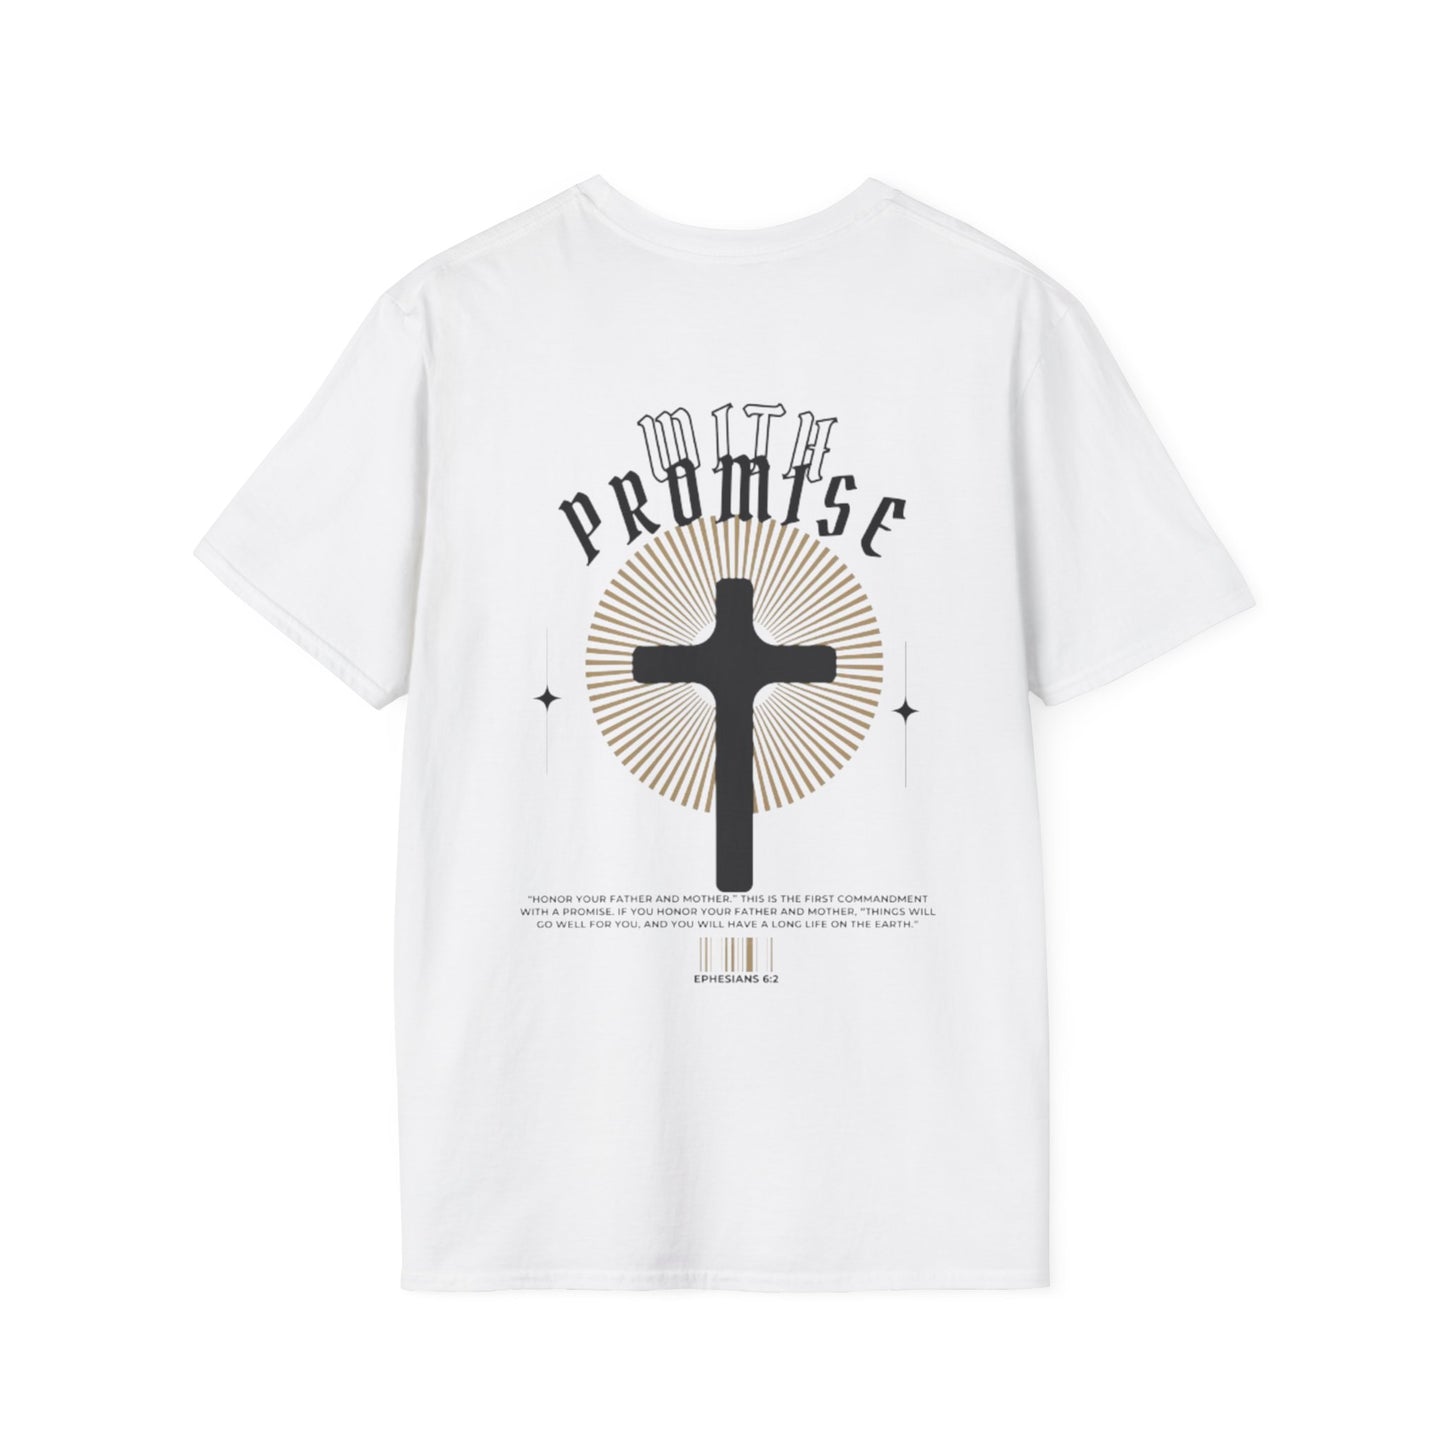 With Promise - Unisex Softstyle T-Shirt